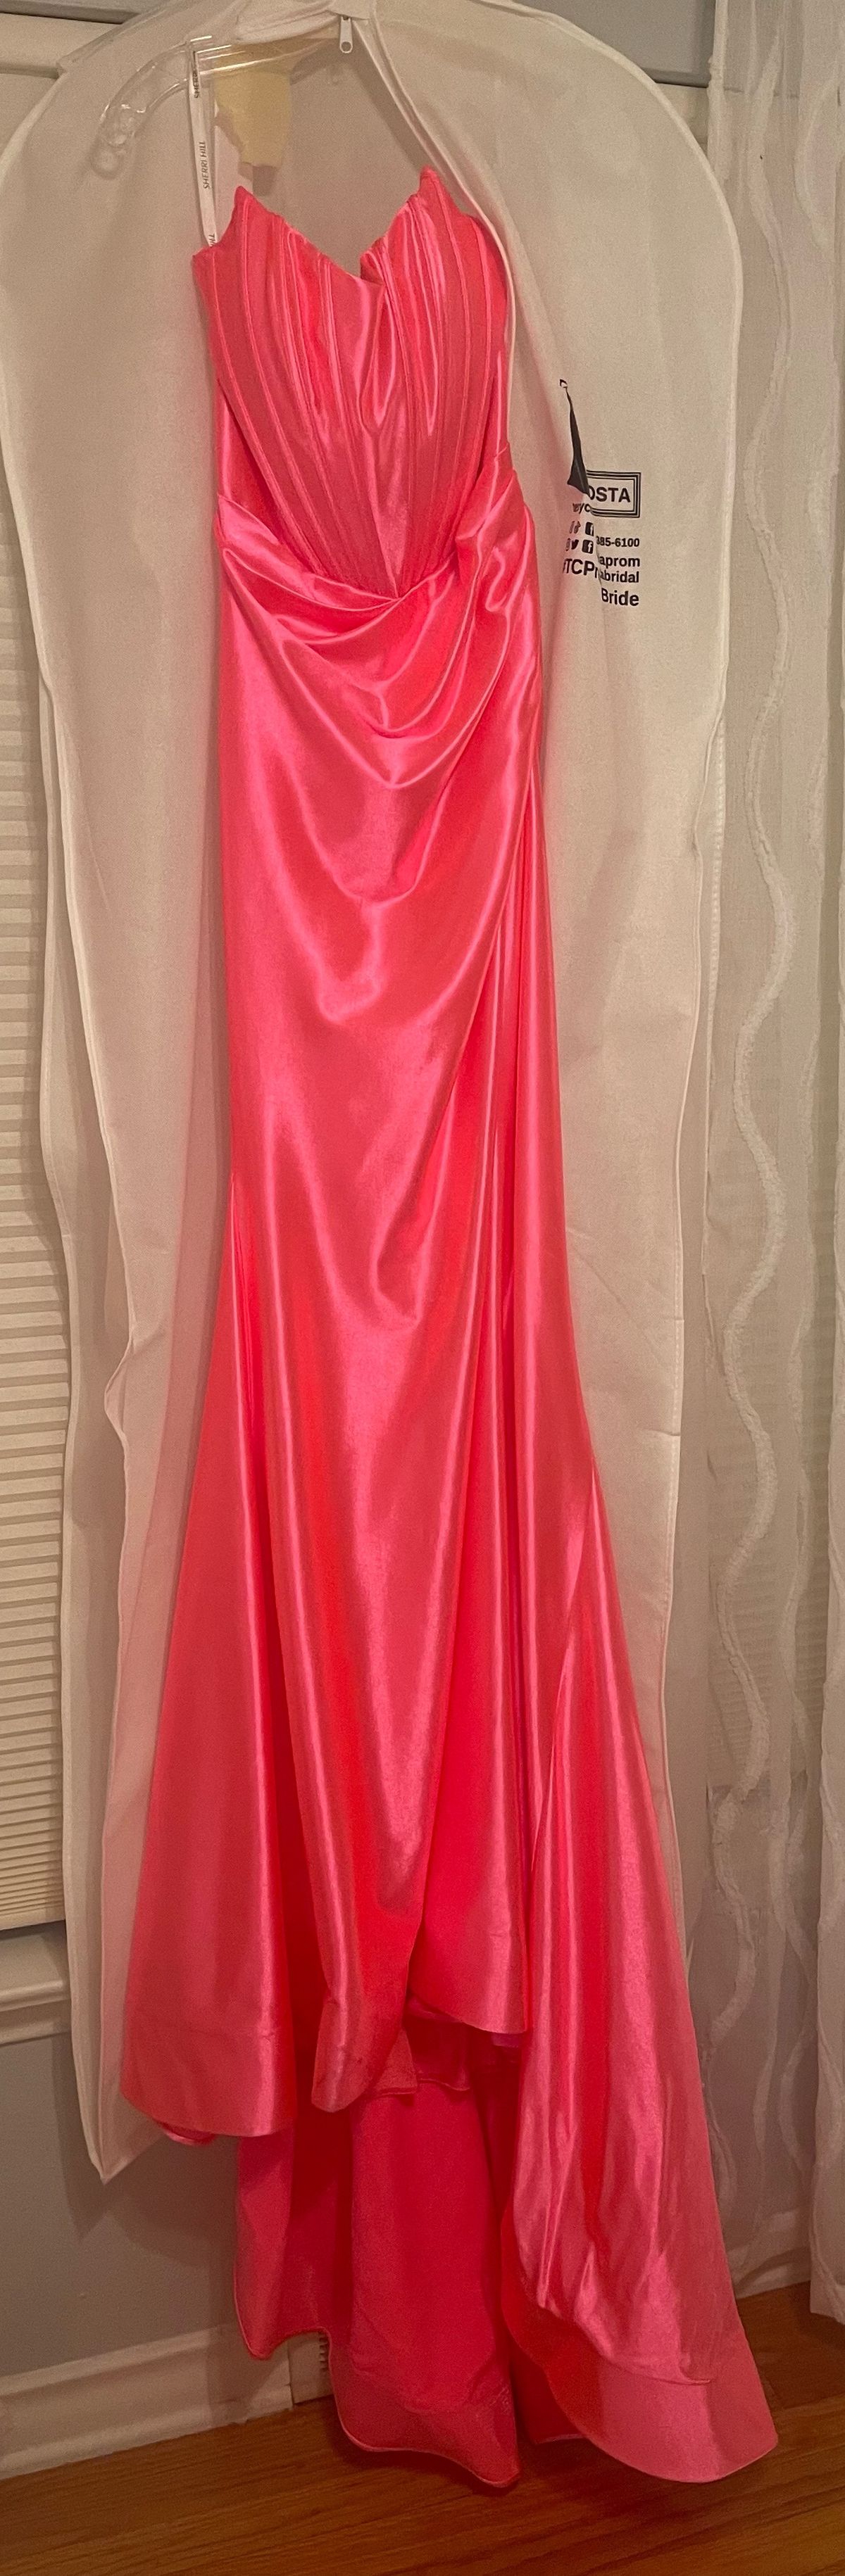 Sherri Hill Size 00 Prom Strapless Satin Coral Mermaid Dress on Queenly